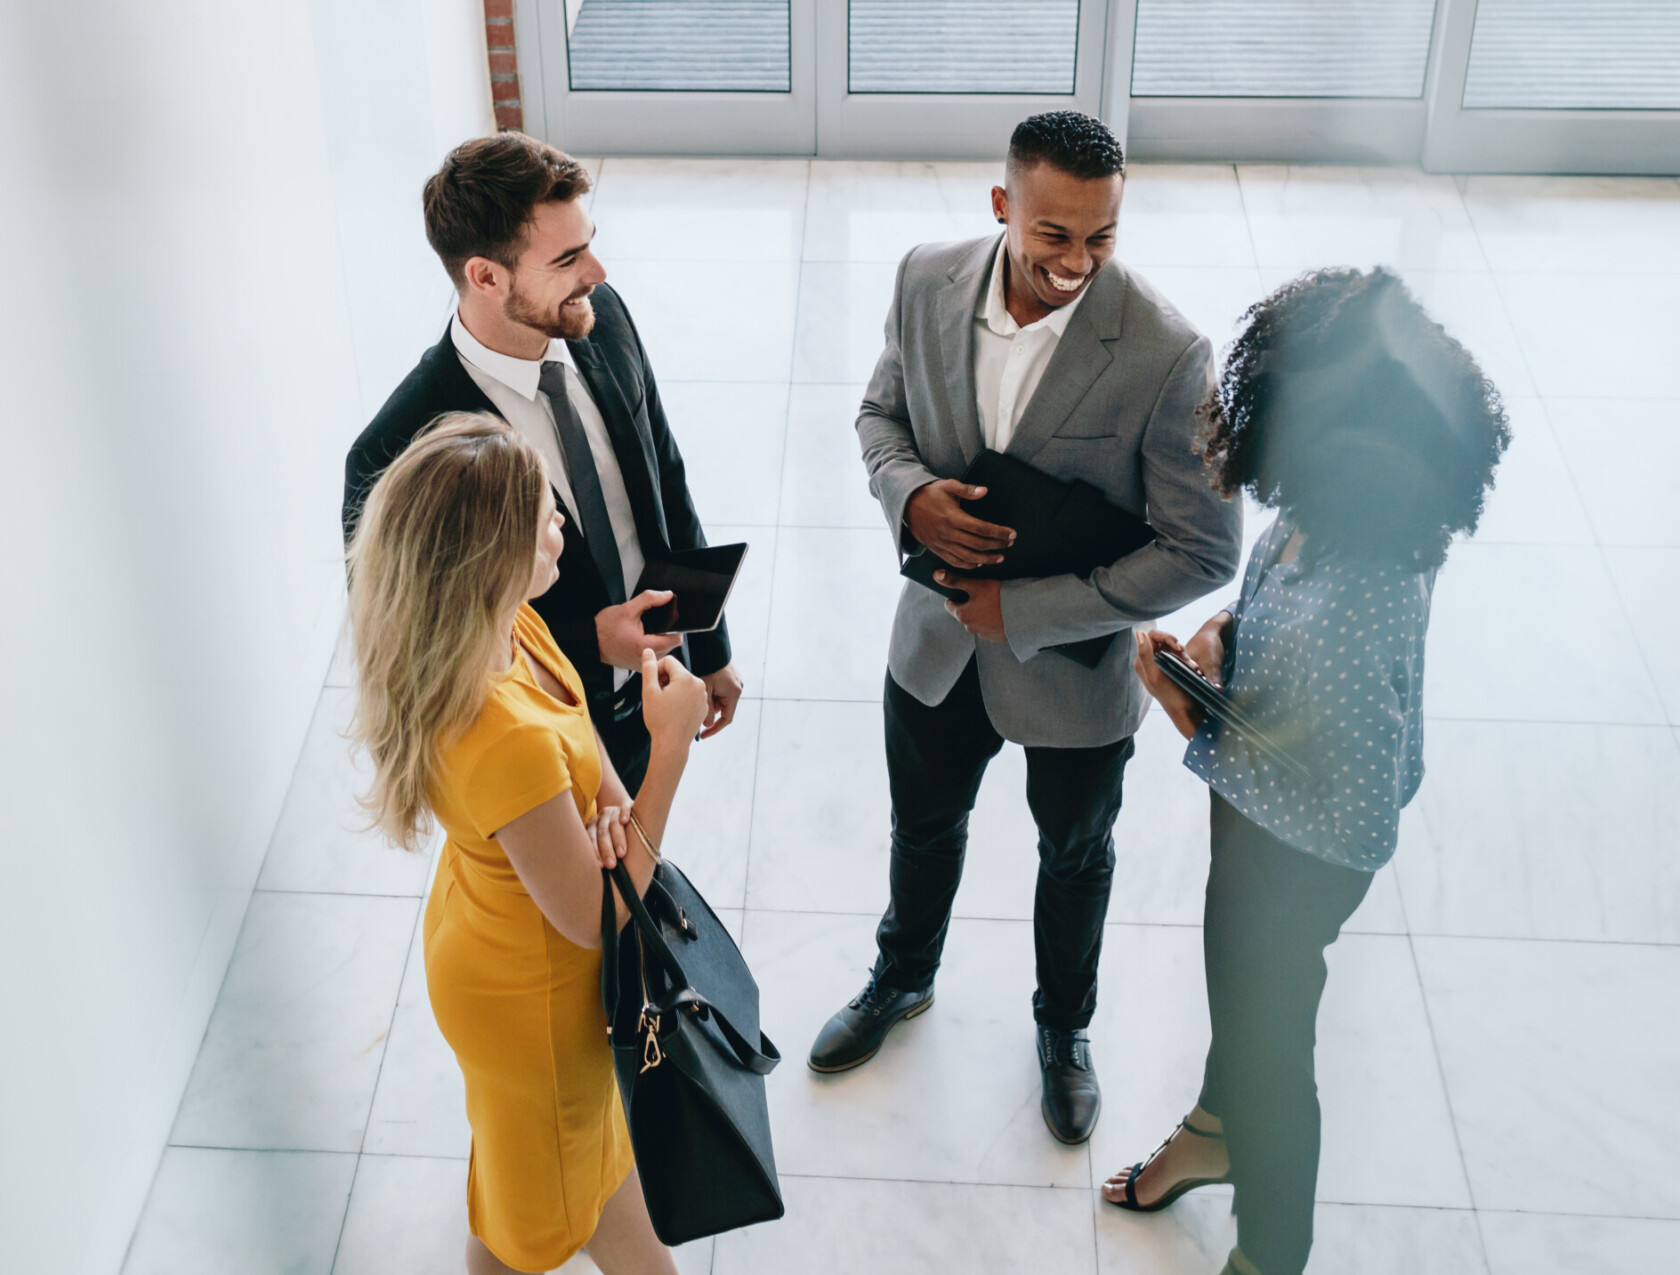 Group of young business professionals standing together and having casual discussing in office hallway. Business colleagues having casual meeting in office lobby.